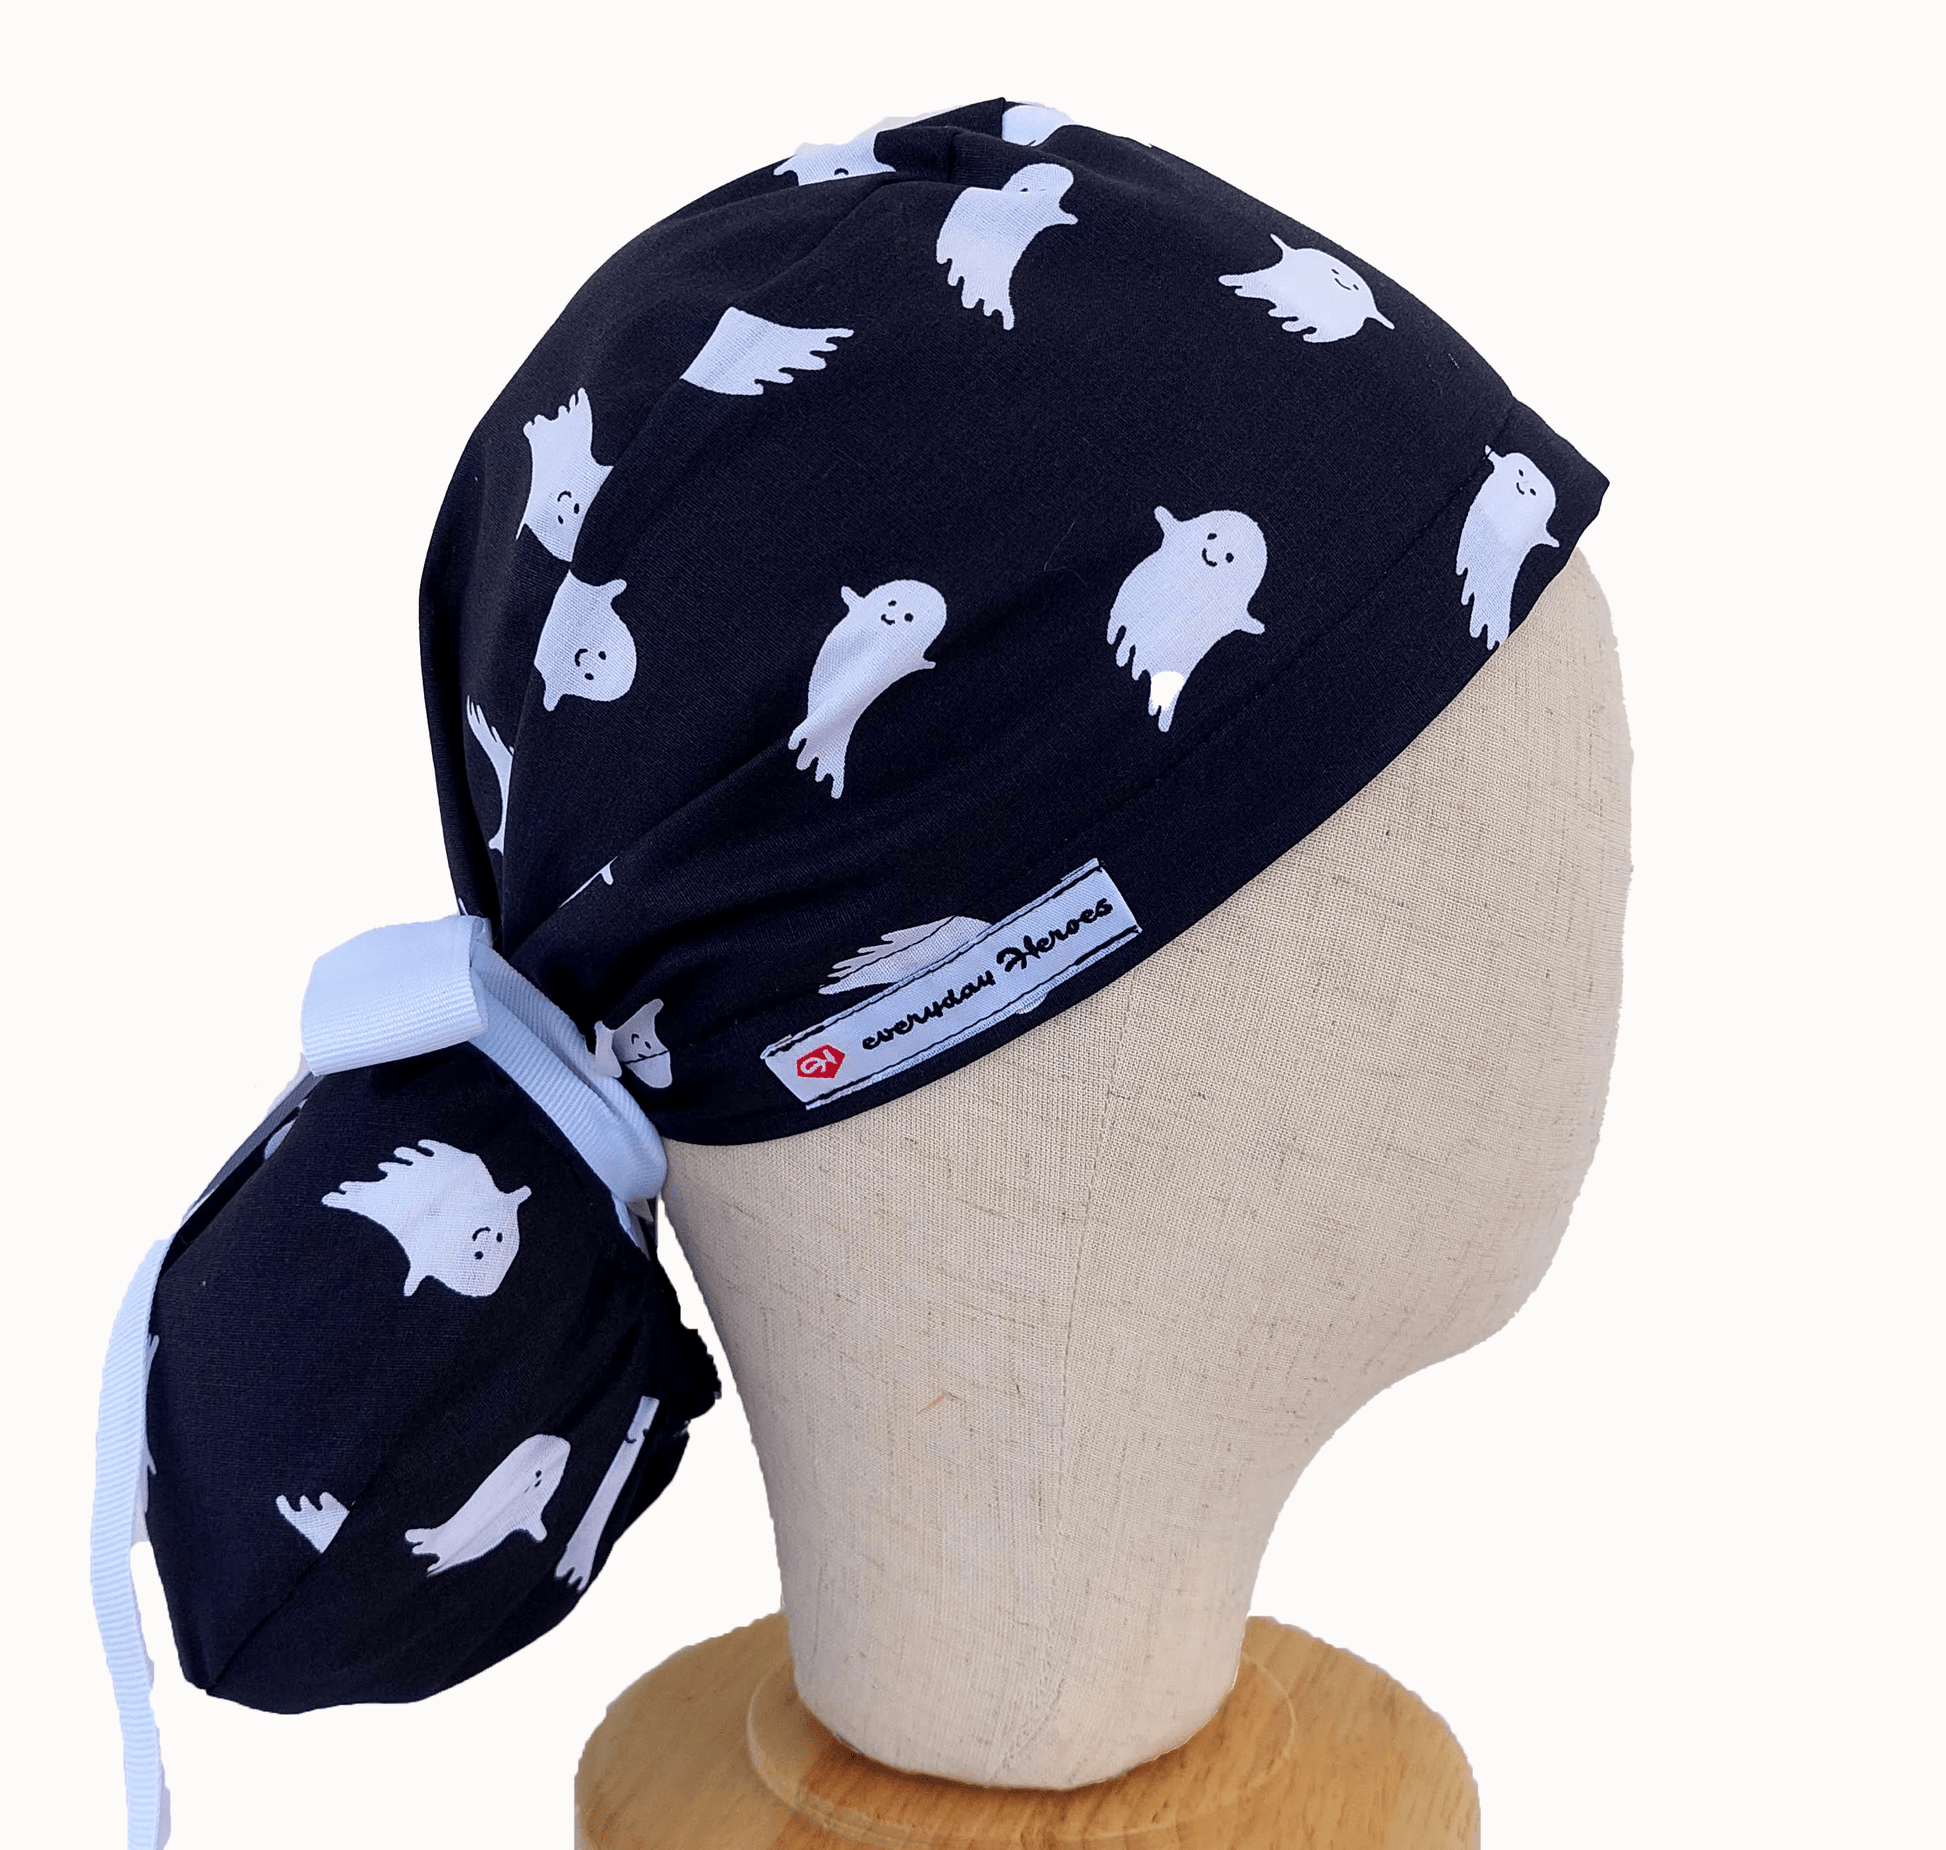 Ponytail Scrub Cap -  Surgical Cap with Black and White Ghosts